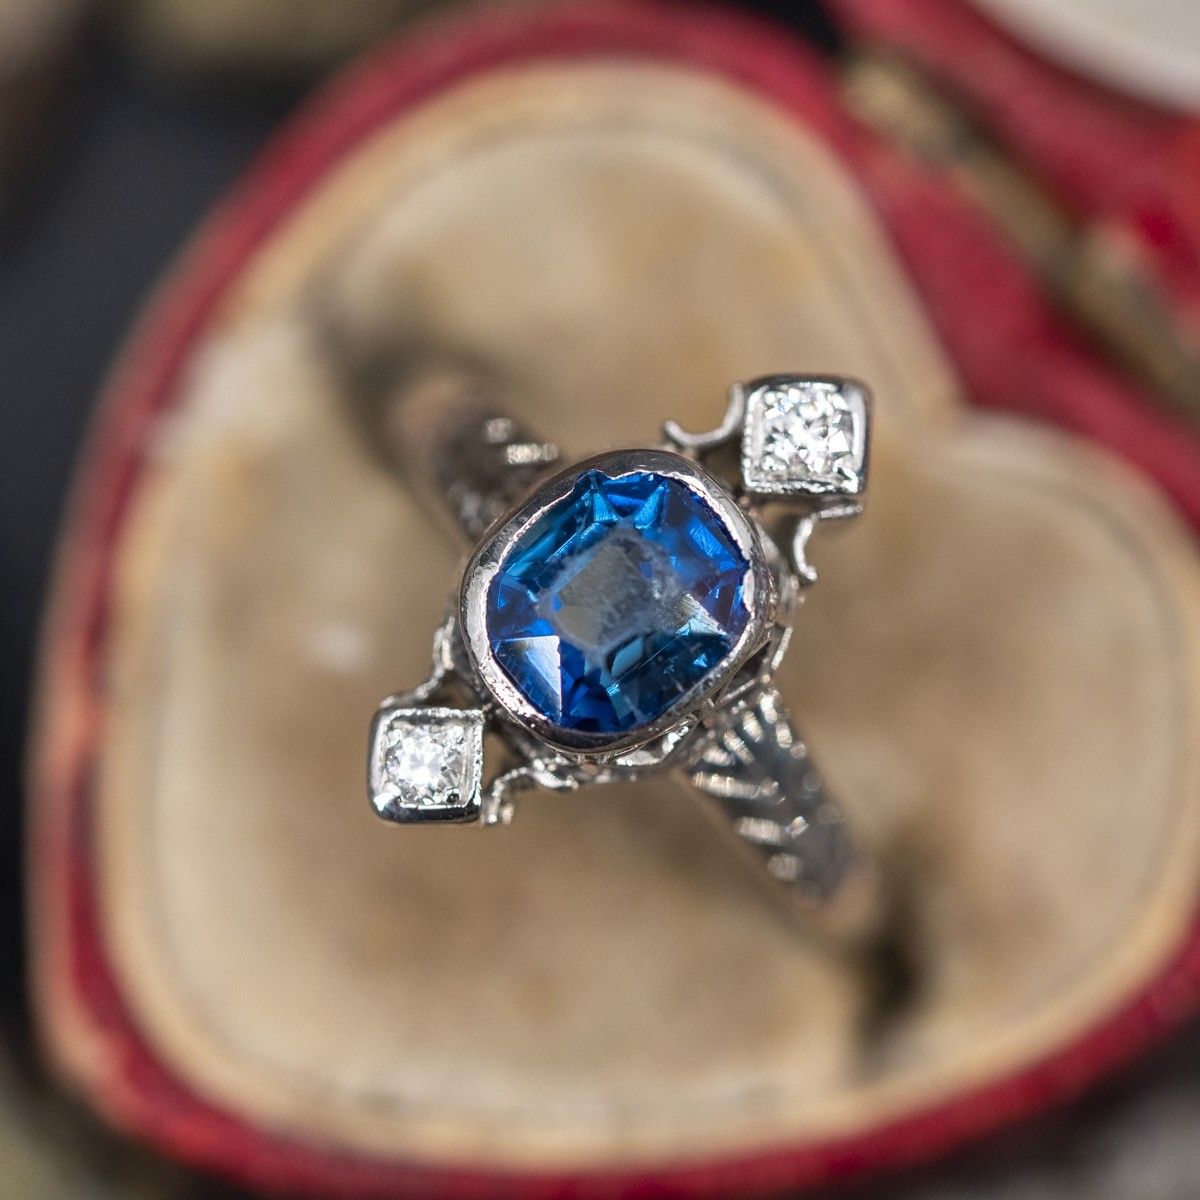 CREATED BLUE SAPPHIRE w/ CZ Accents10k White Gold Ladies Ring Handmade • R254-WG 